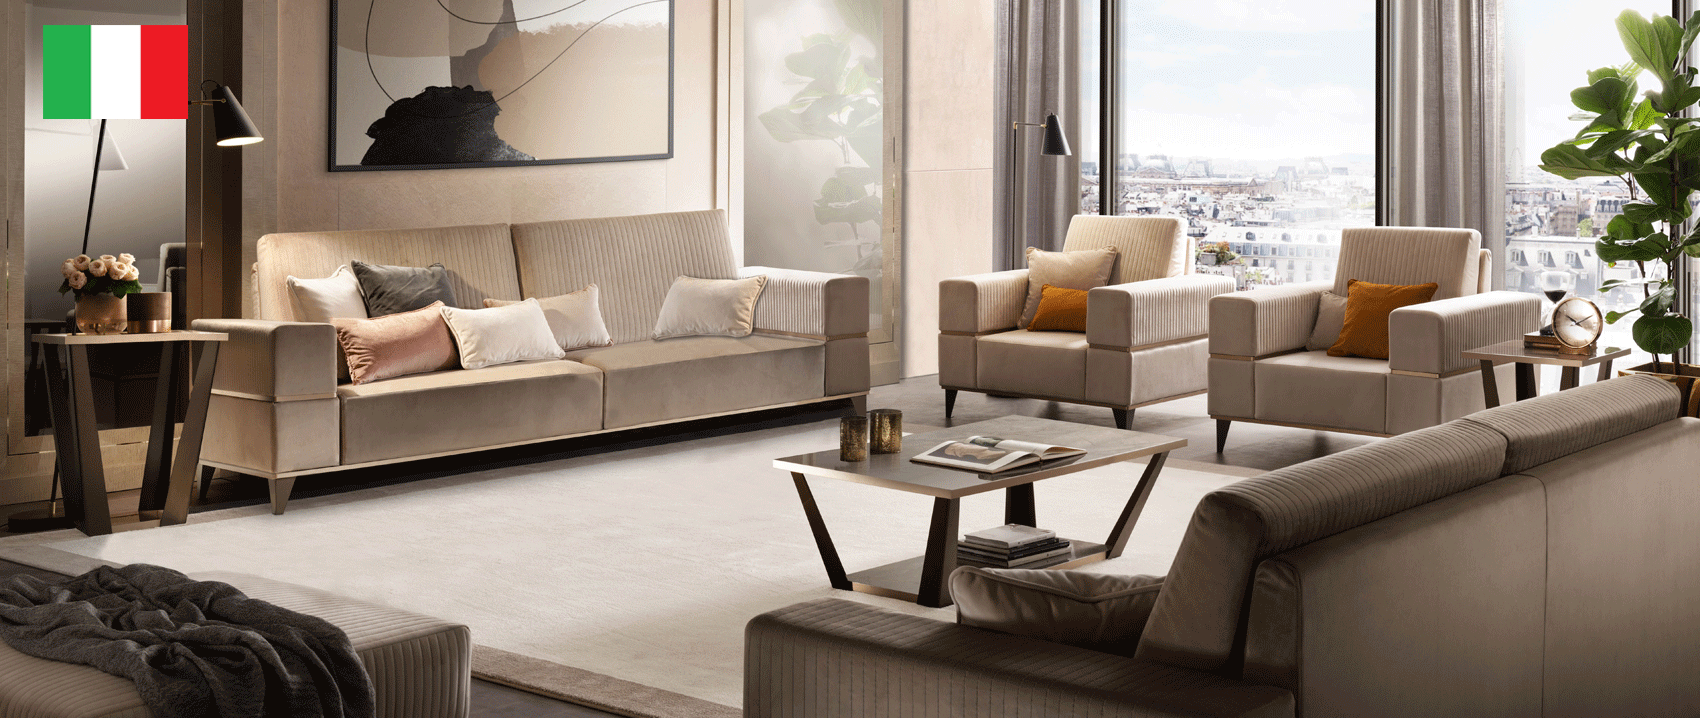 Brands Formerin Modern Living Room, Italy ArredoAmbra Living by Arredoclassic, Italy